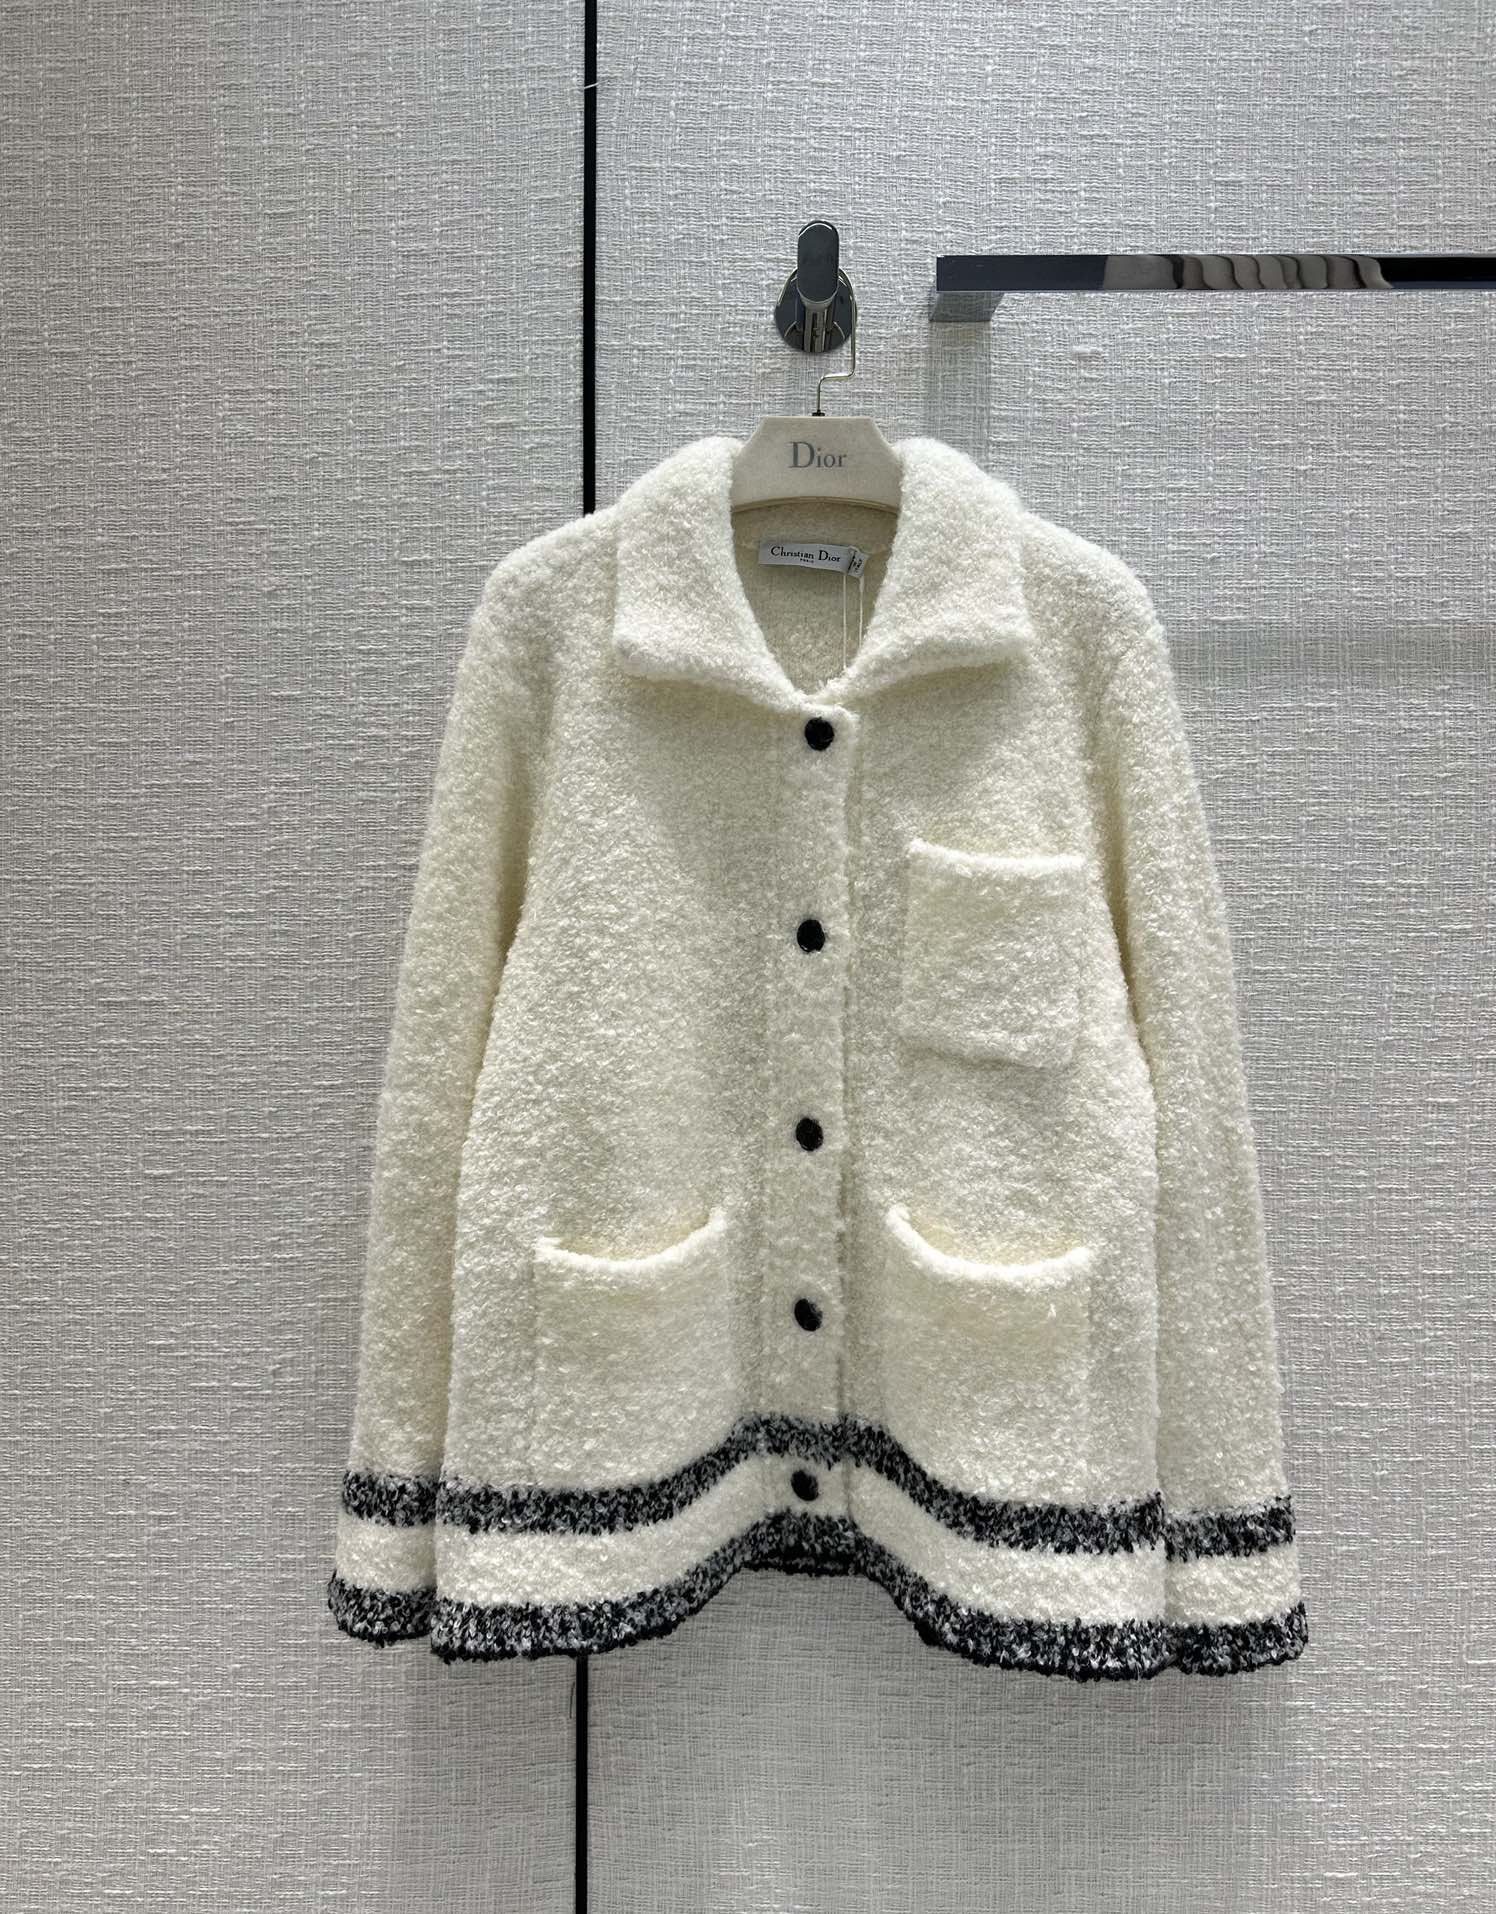 Dior Clothing Coats & Jackets Wholesale Imitation Designer Replicas
 Wool Fall Collection Casual